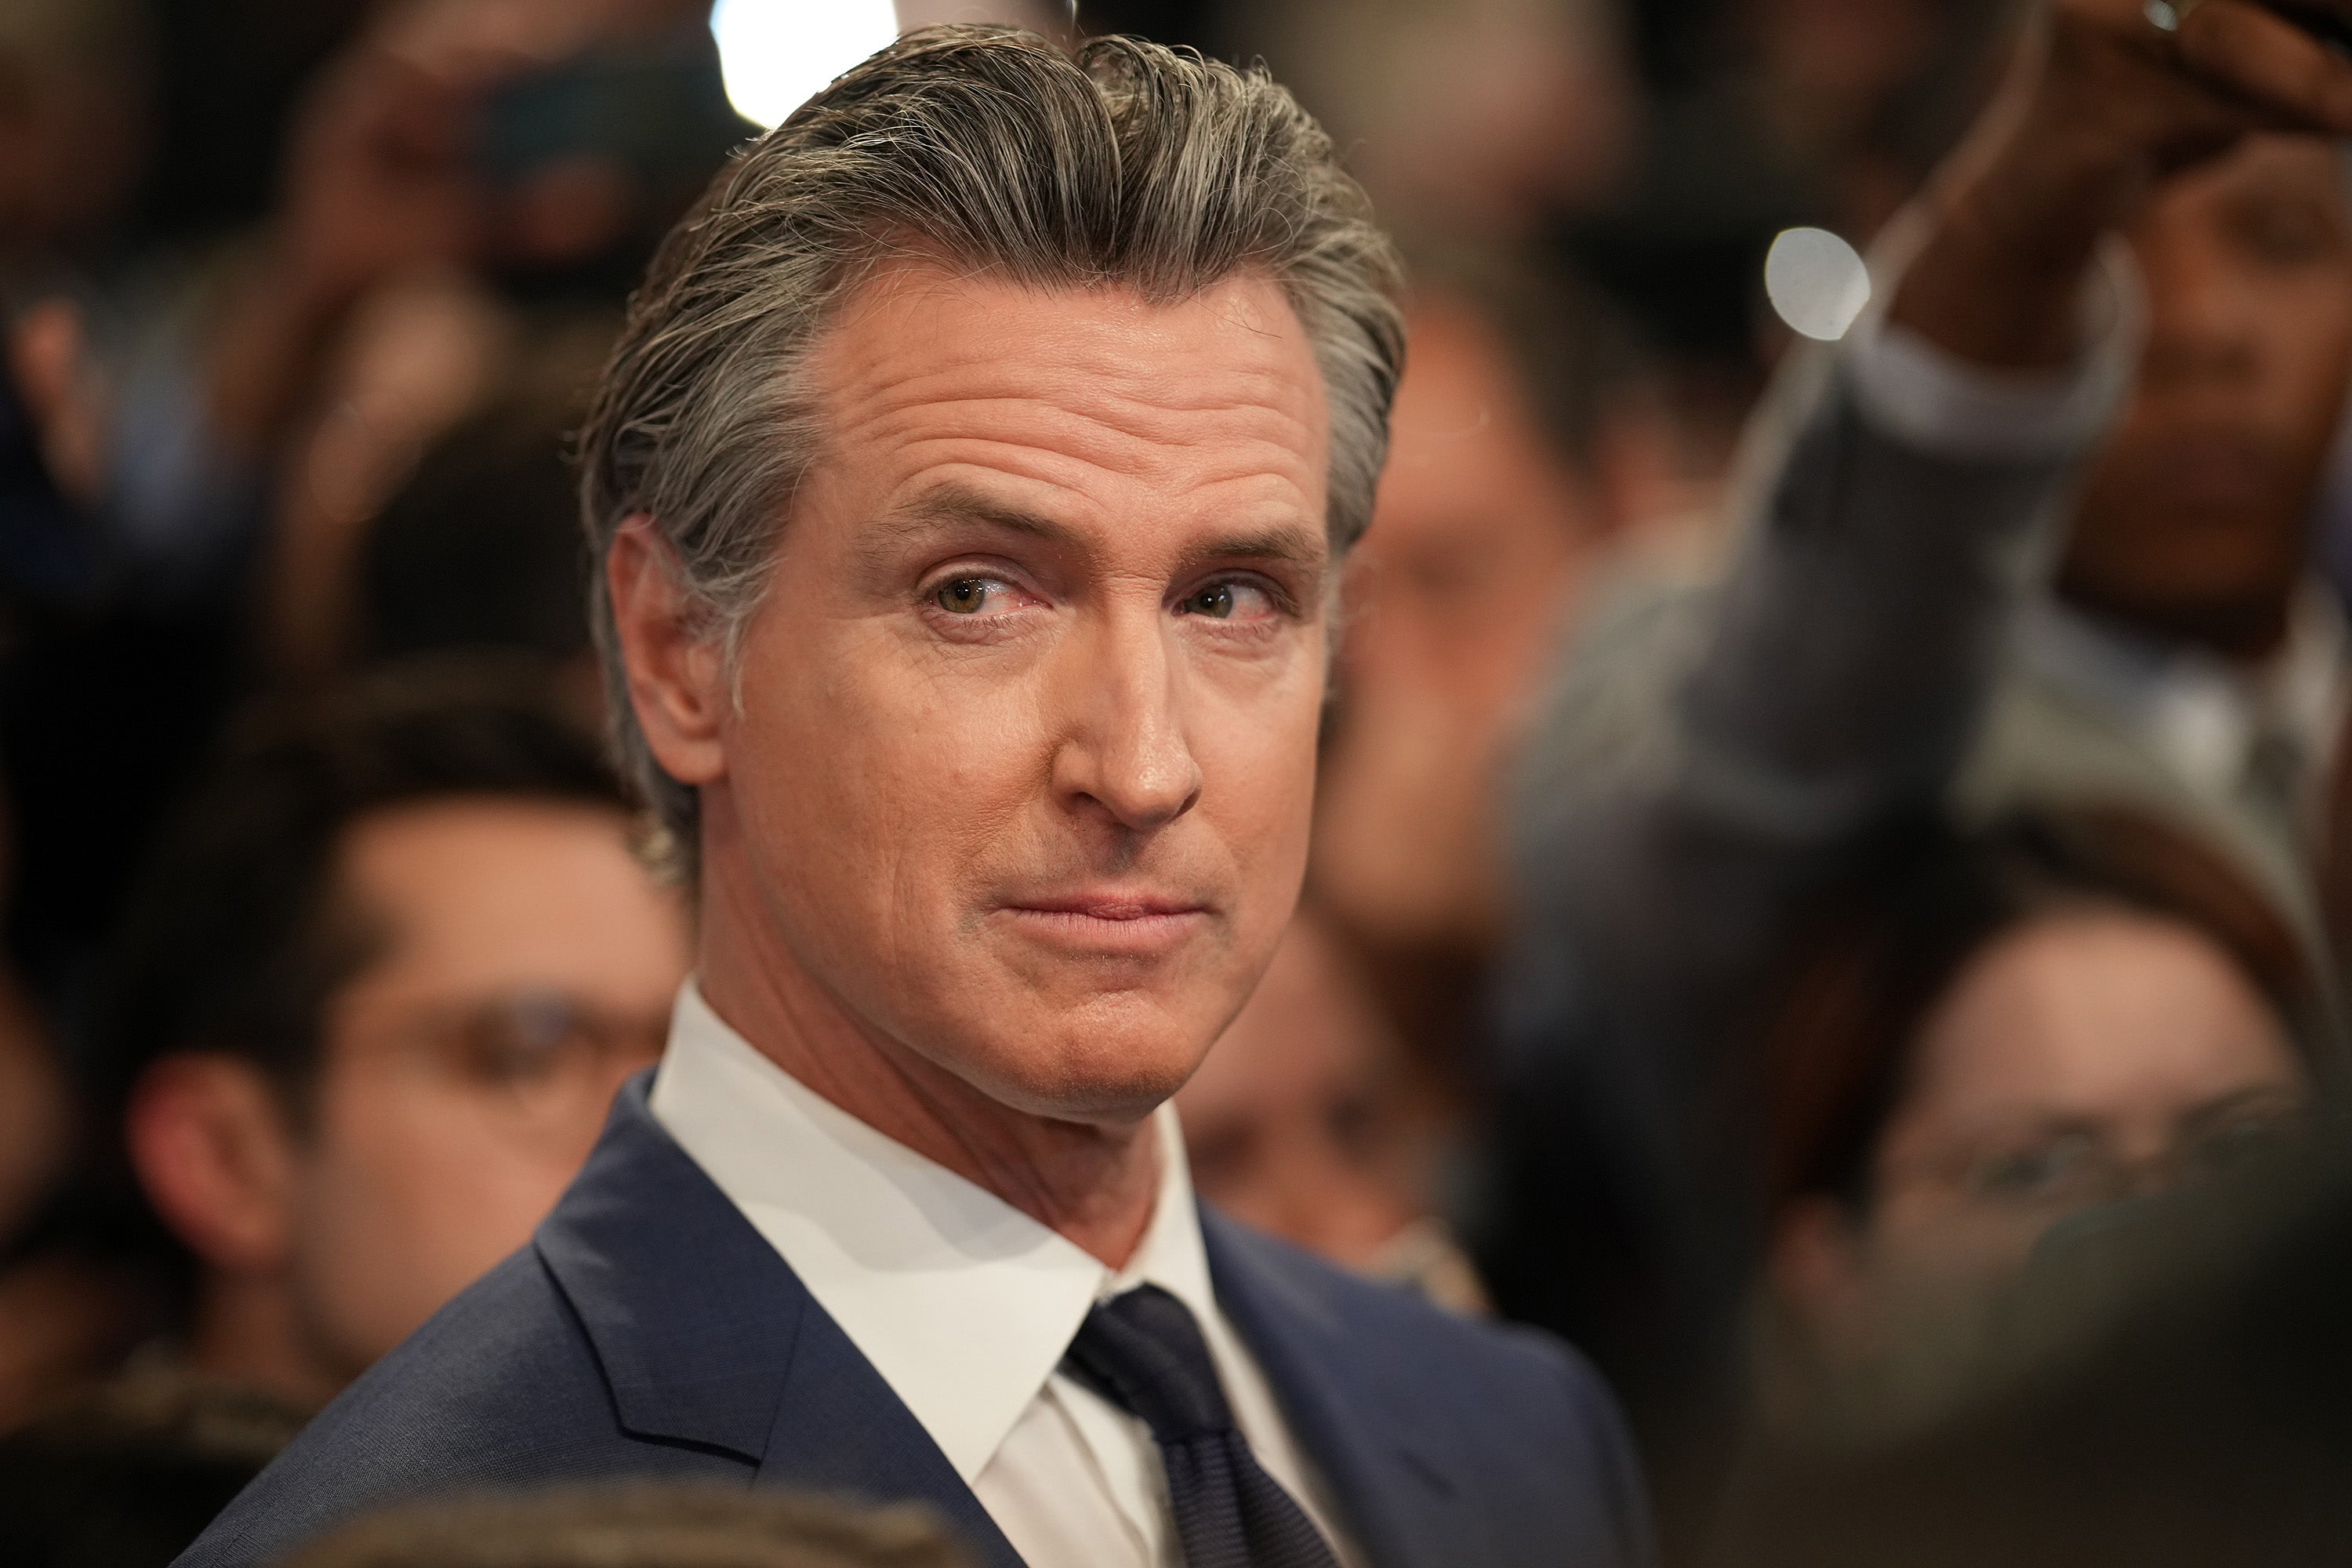 Gov. Gavin Newsom (D-CA) was one of the few Democrats willing to defend Biden’s performance at the debate on Thursday.